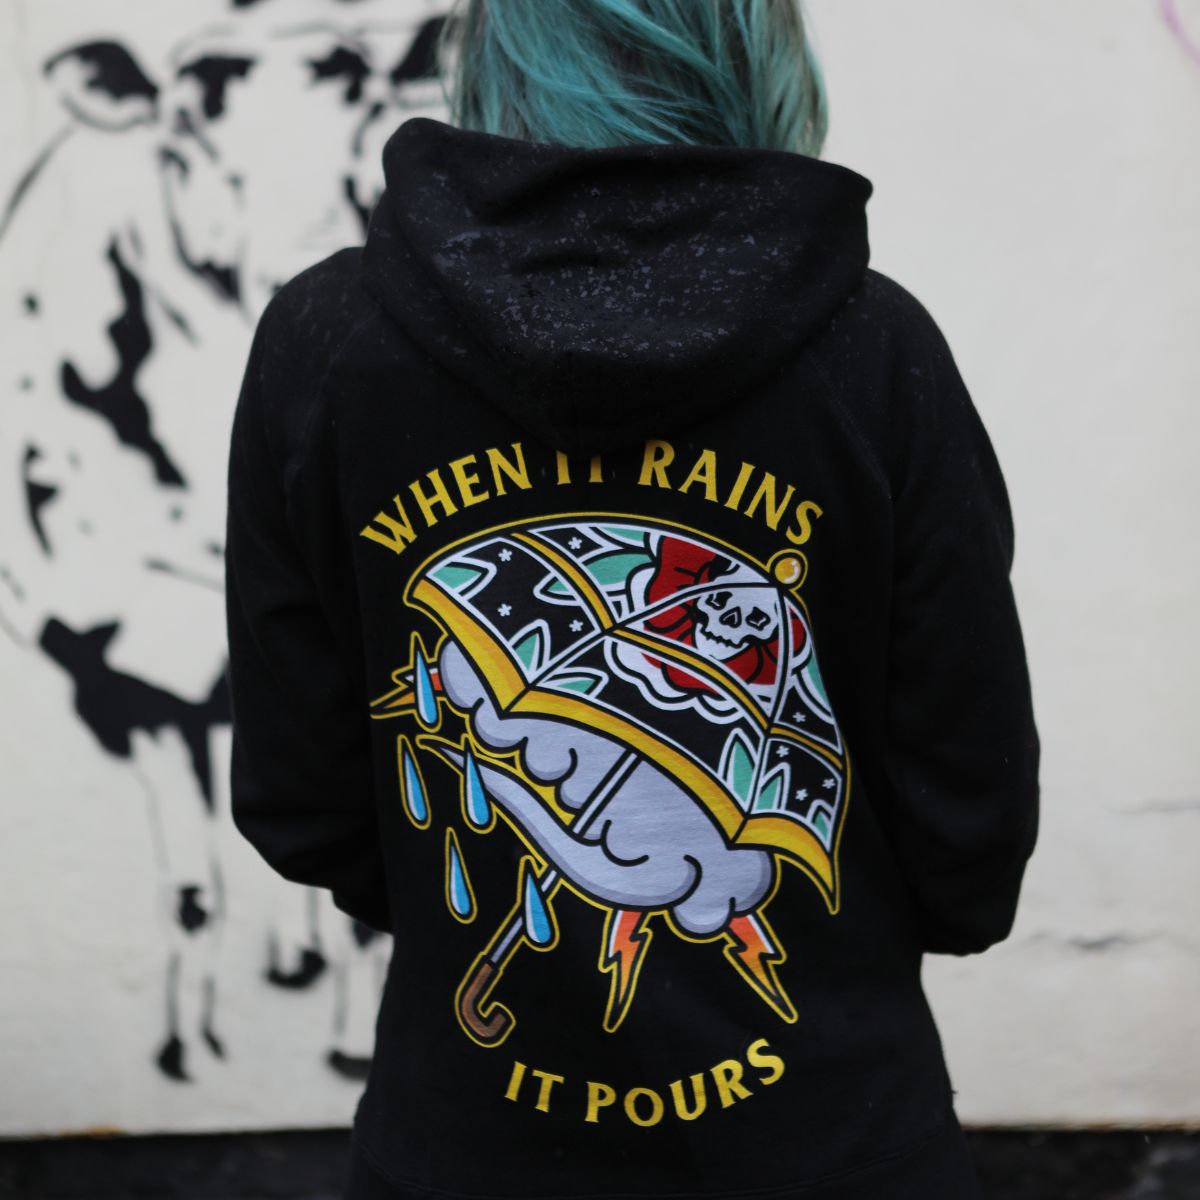 Thick Thighs Thin Patience Hoodie (Unisex) – Broken Society